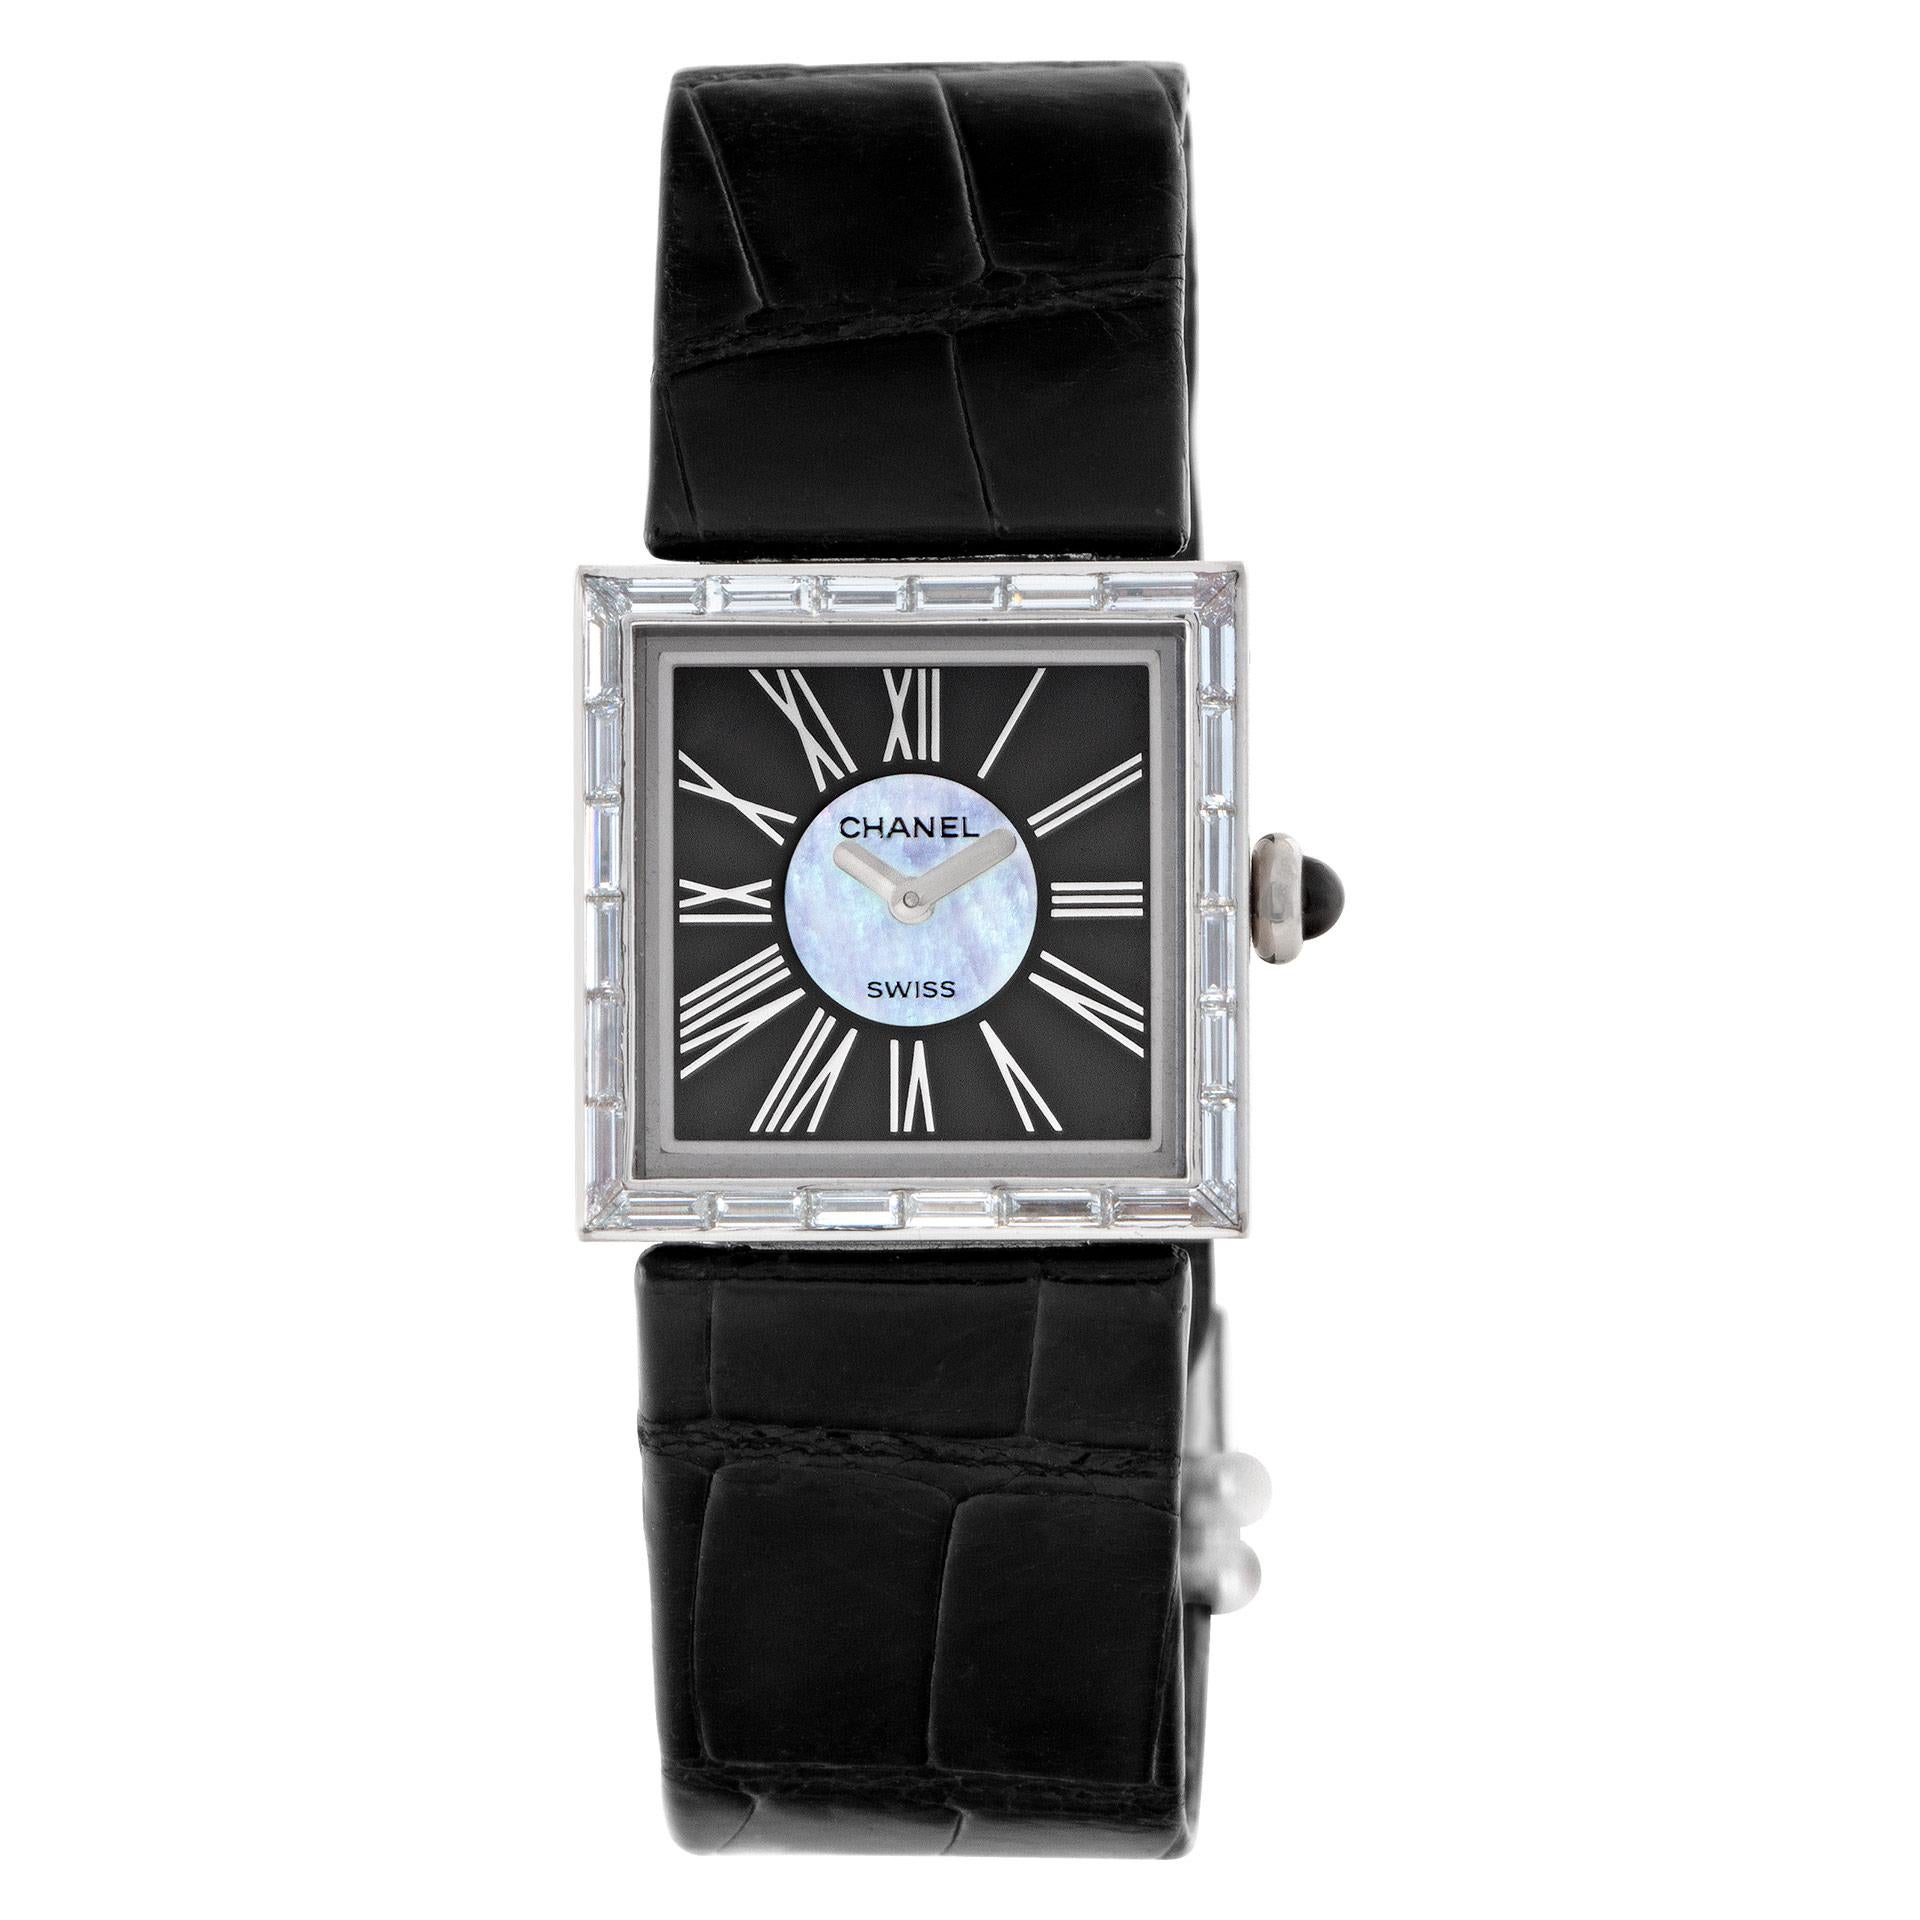 Chanel Mademoiselle Xxx 18k White Gold Black & Silver Dial Quartz Watch In Excellent Condition For Sale In Surfside, FL